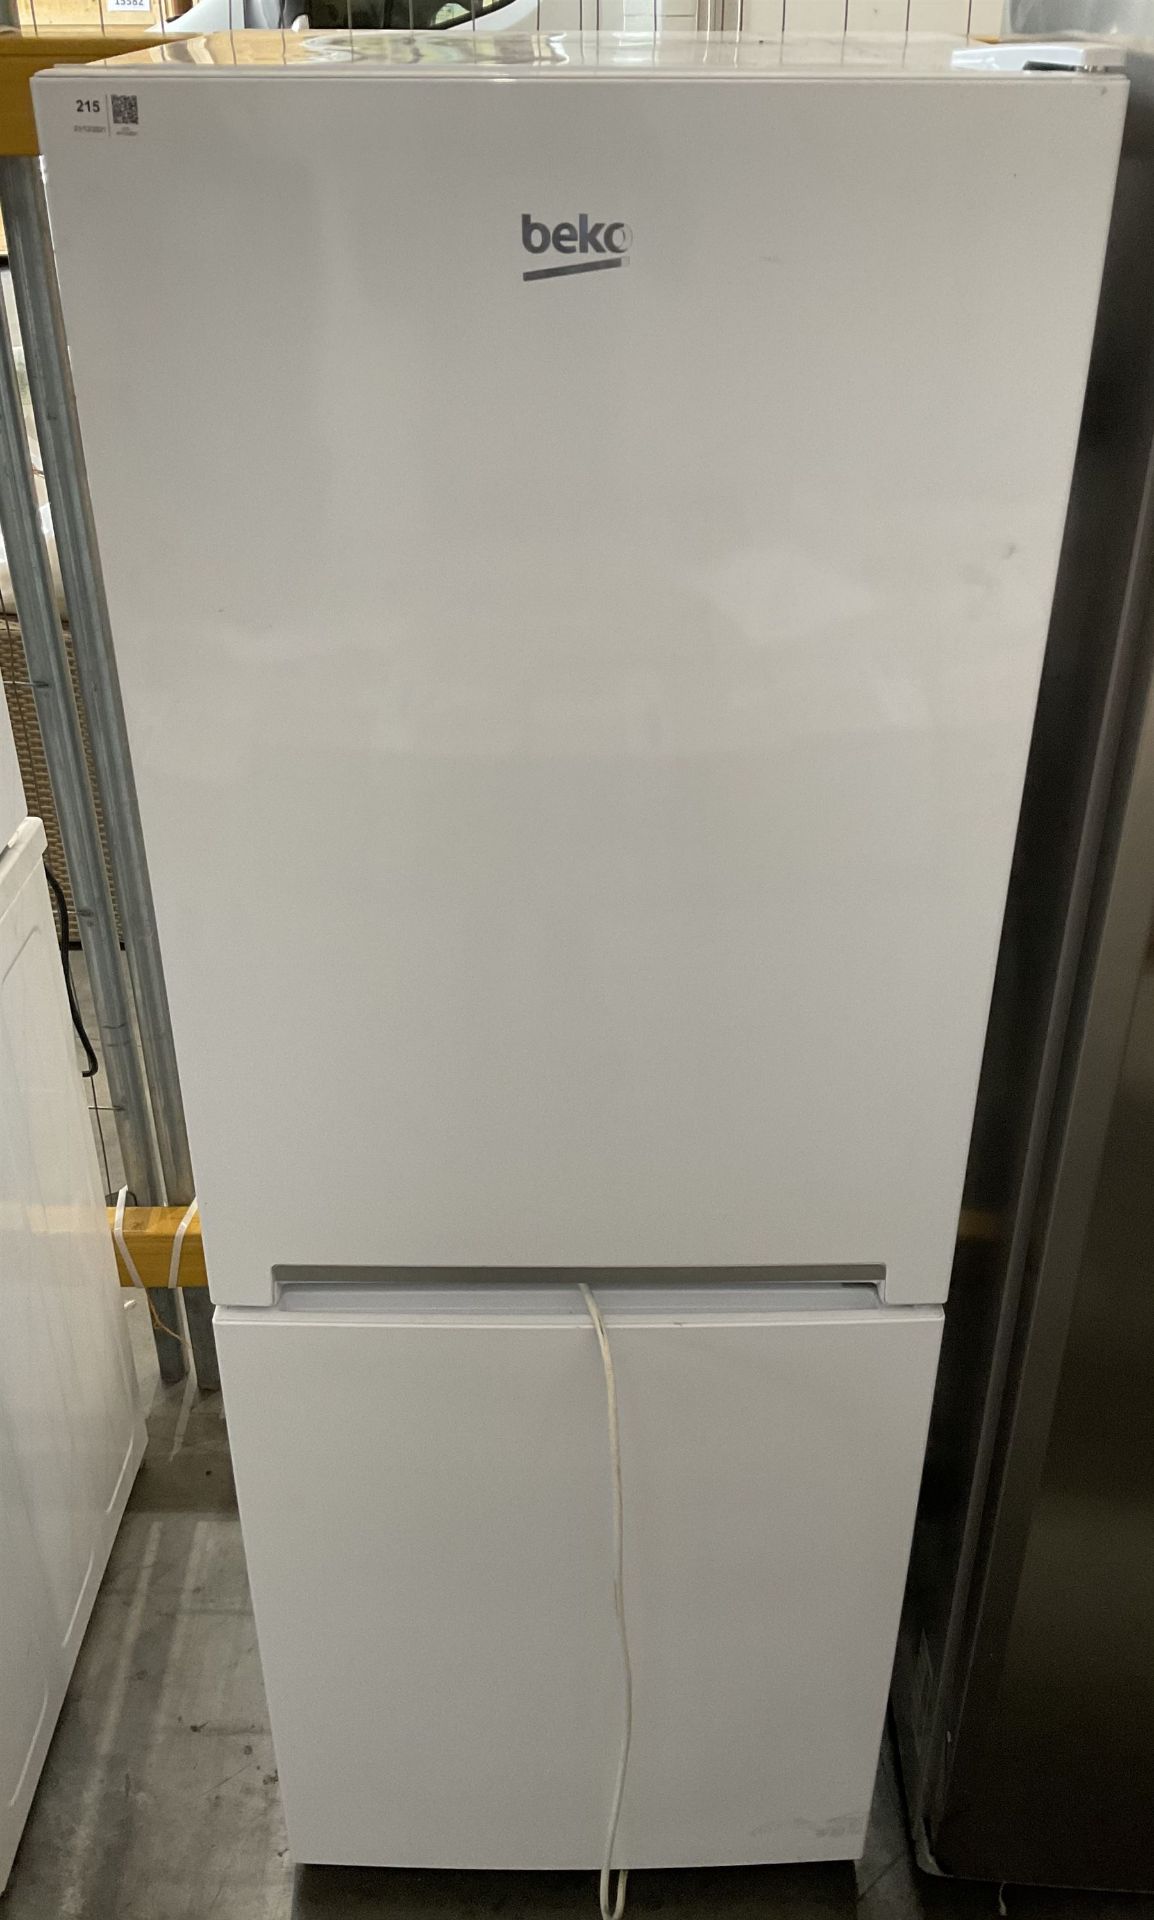 Beko CXFG1552W fridge freezer - THIS LOT IS TO BE COLLECTED BY APPOINTMENT FROM DUGGLEBY STORAGE